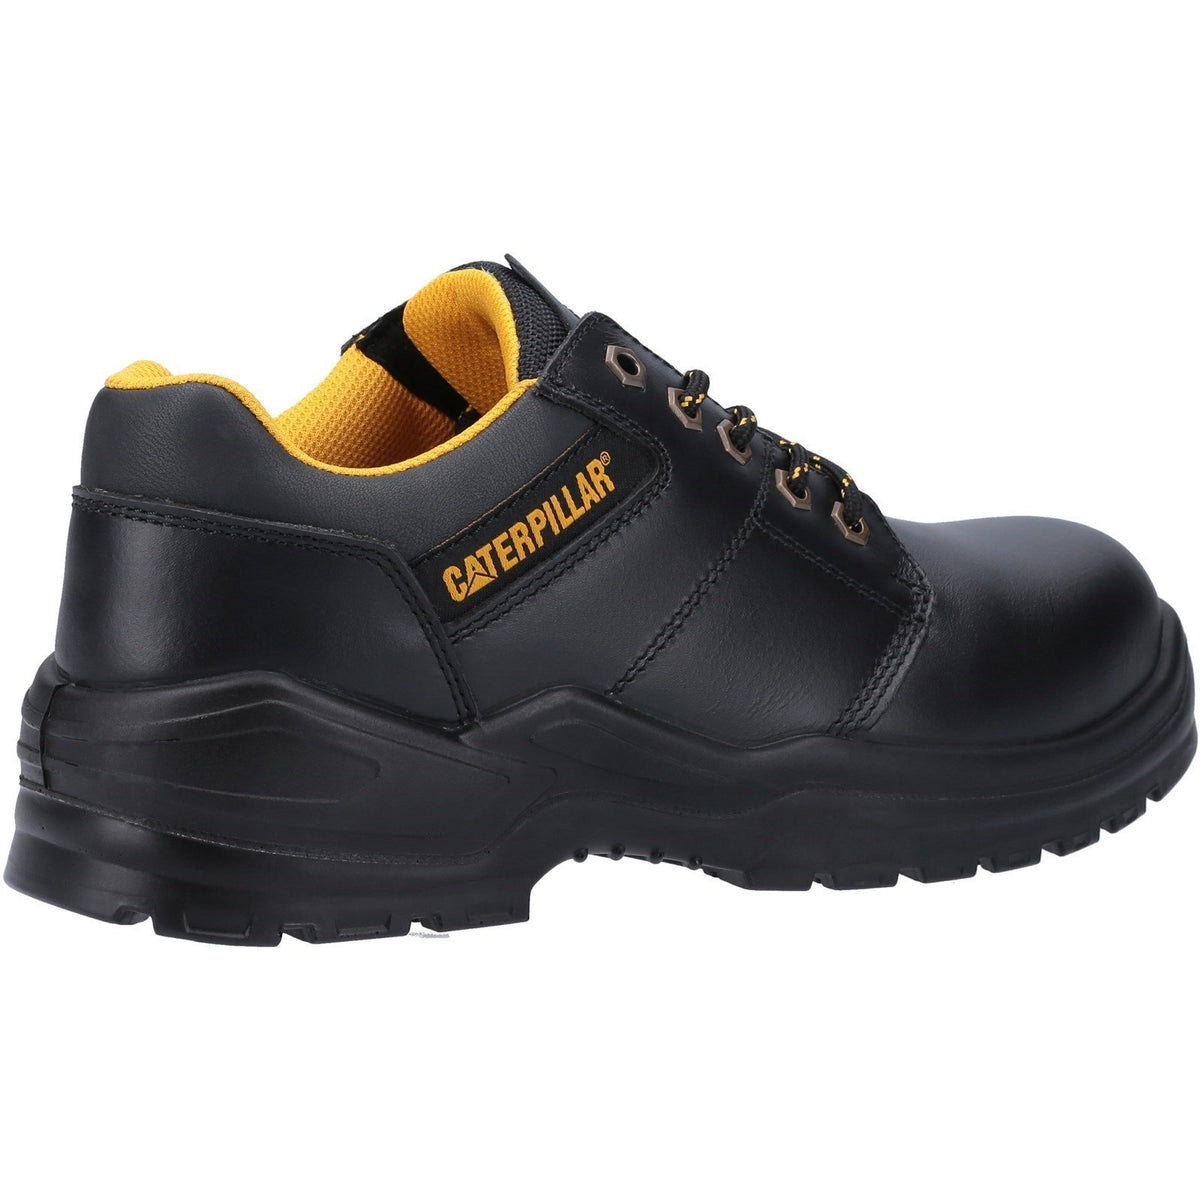 Caterpillar Striver S3 Wide-Fit Safety Shoe with Steel Toe Cap - Black ...